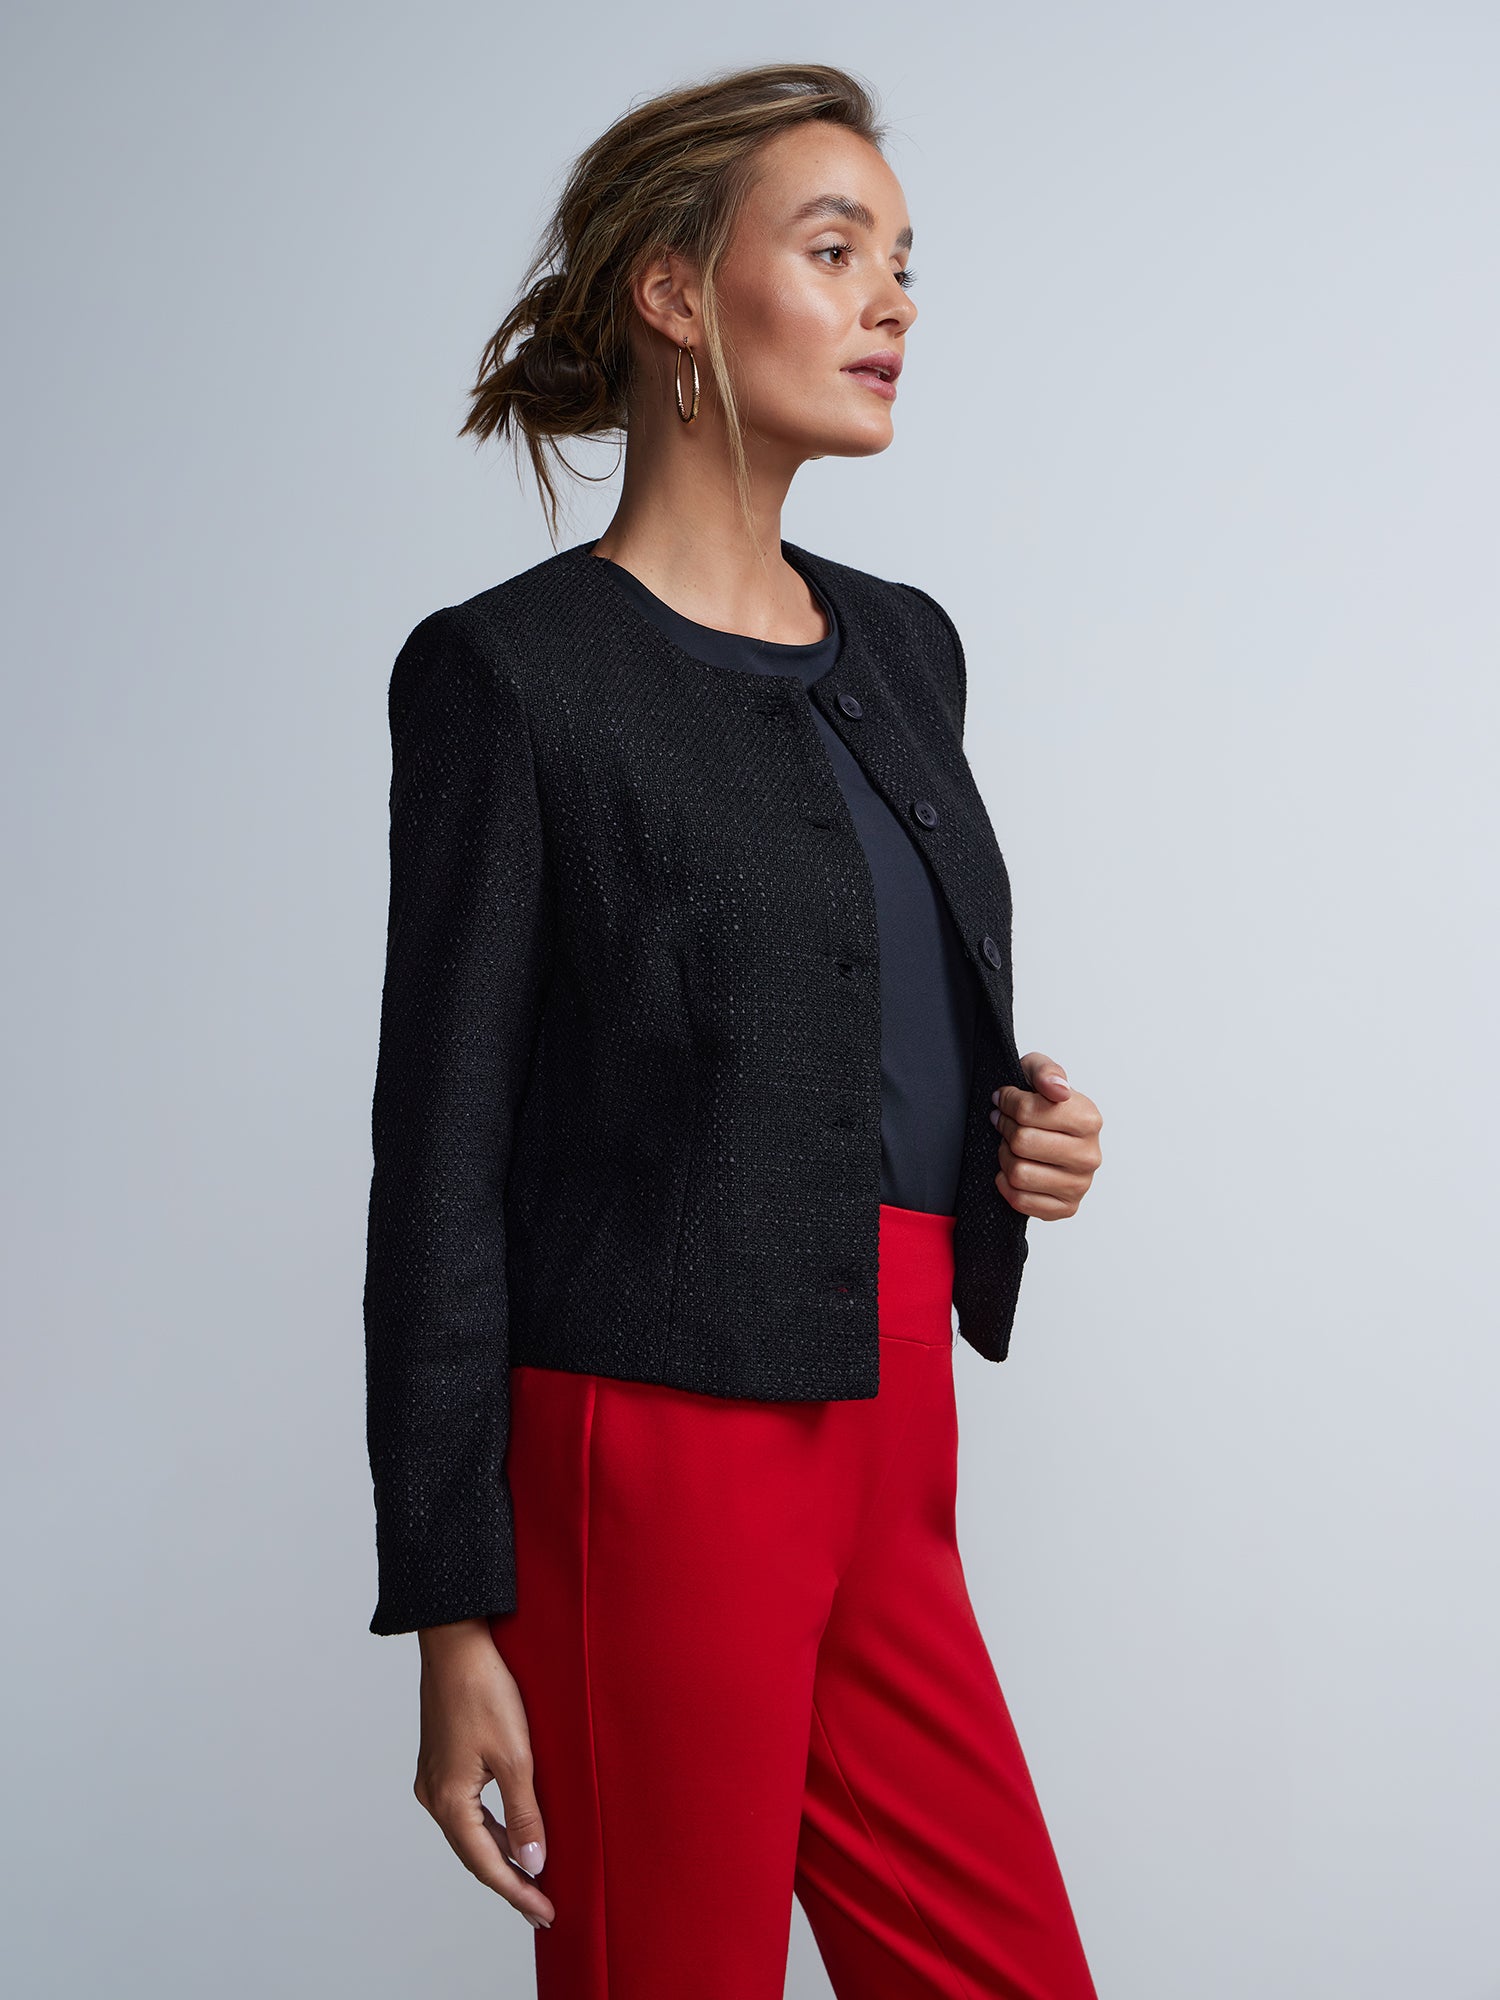 Short Front Button Boucle Jacket | NY&Co